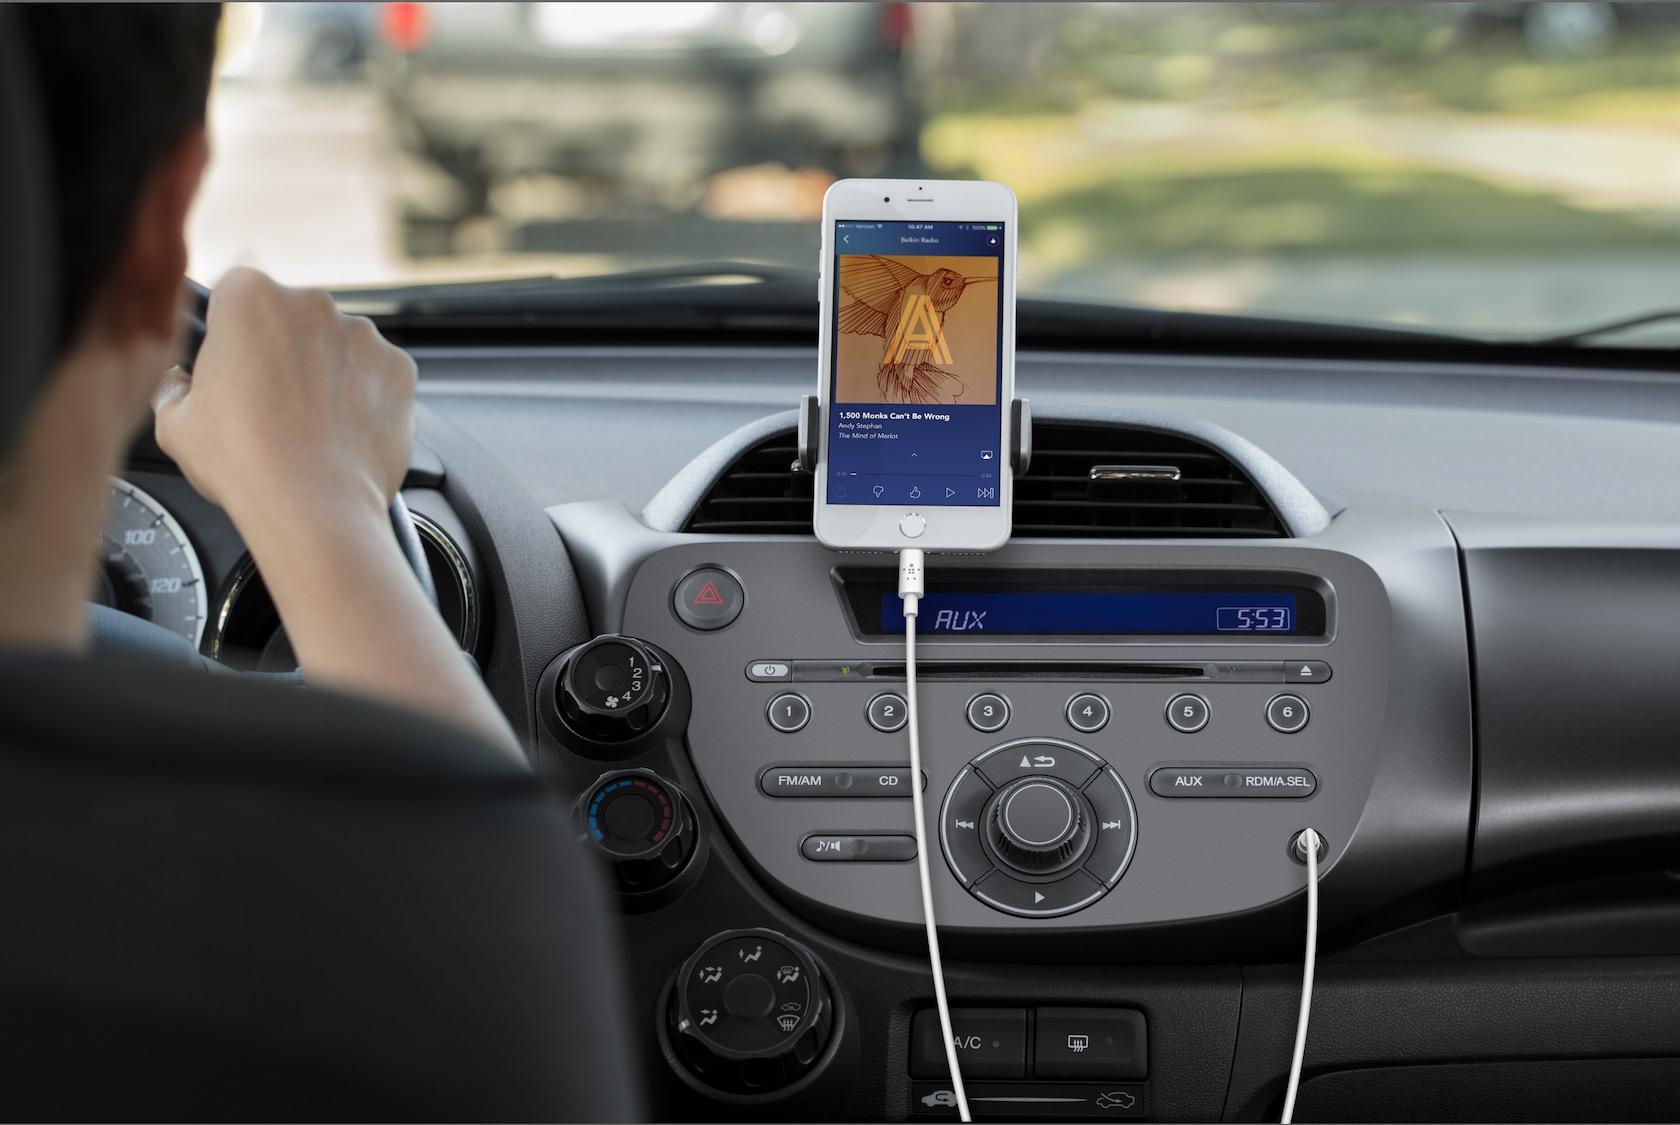 How To Connect Iphone To Old Car Speakers